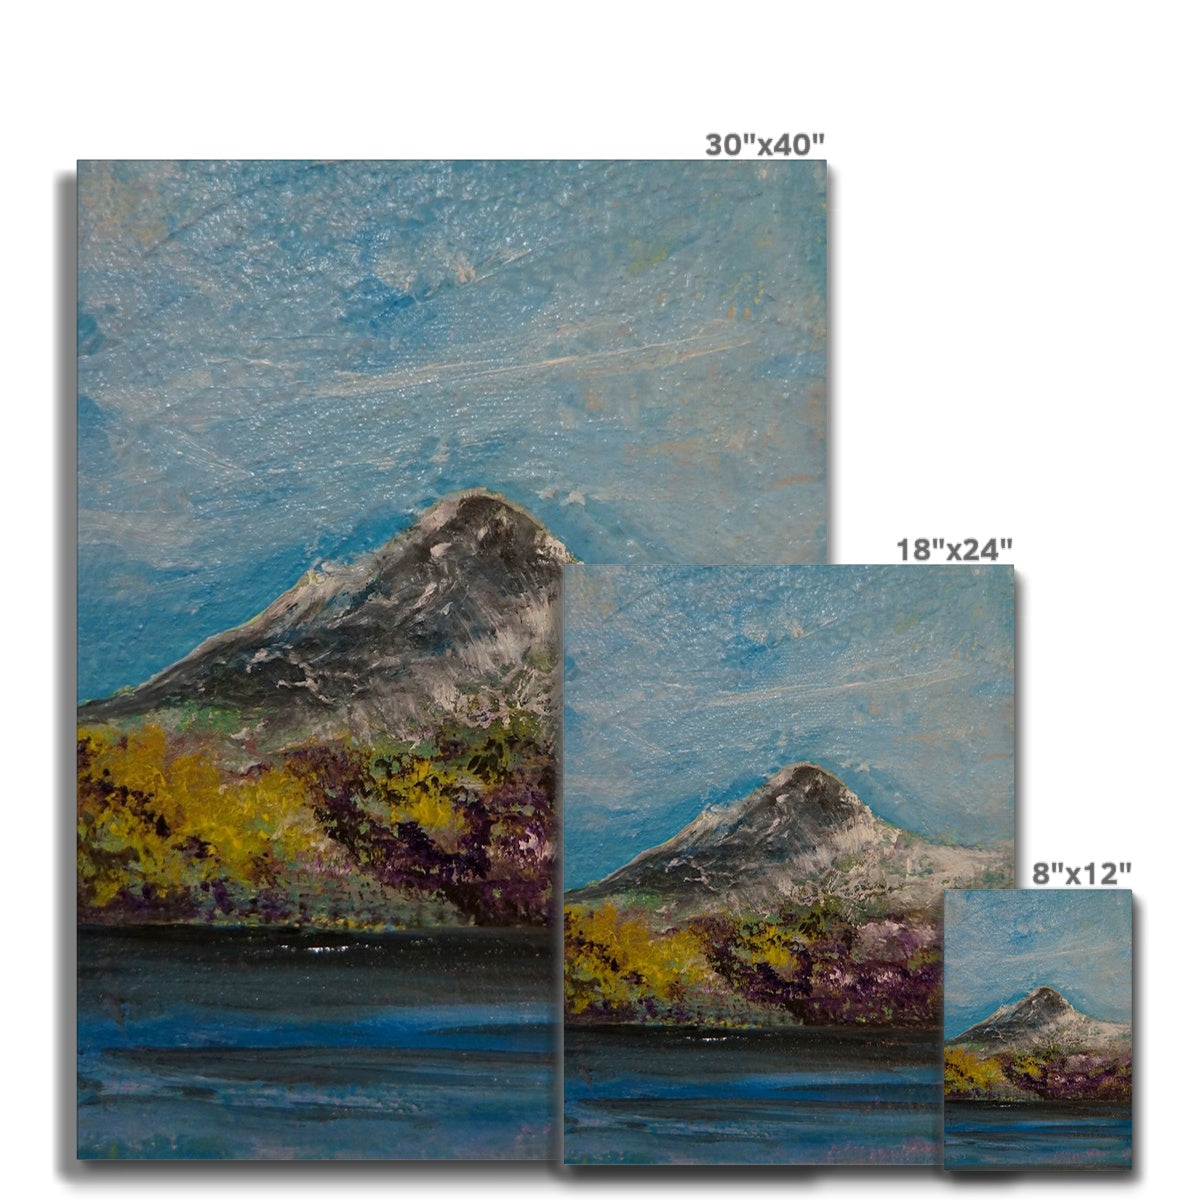 Ben Lomond ii Painting | Canvas From Scotland-Contemporary Stretched Canvas Prints-Scottish Lochs & Mountains Art Gallery-Paintings, Prints, Homeware, Art Gifts From Scotland By Scottish Artist Kevin Hunter